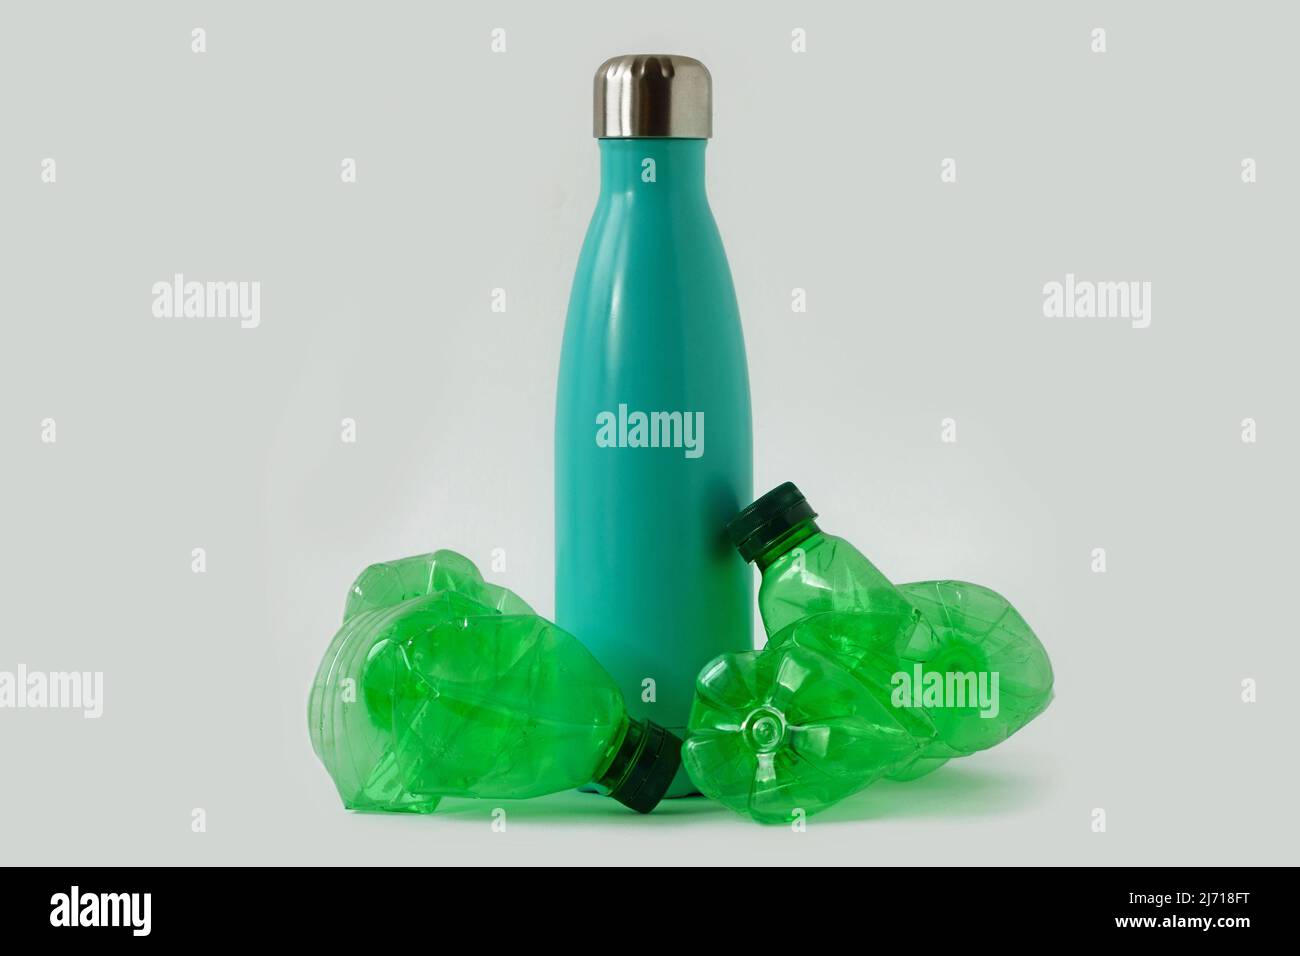 Aluminium stainless thermo bottle with plastic bottles on white background - Concept of ecology and stop plastic pollution Stock Photo